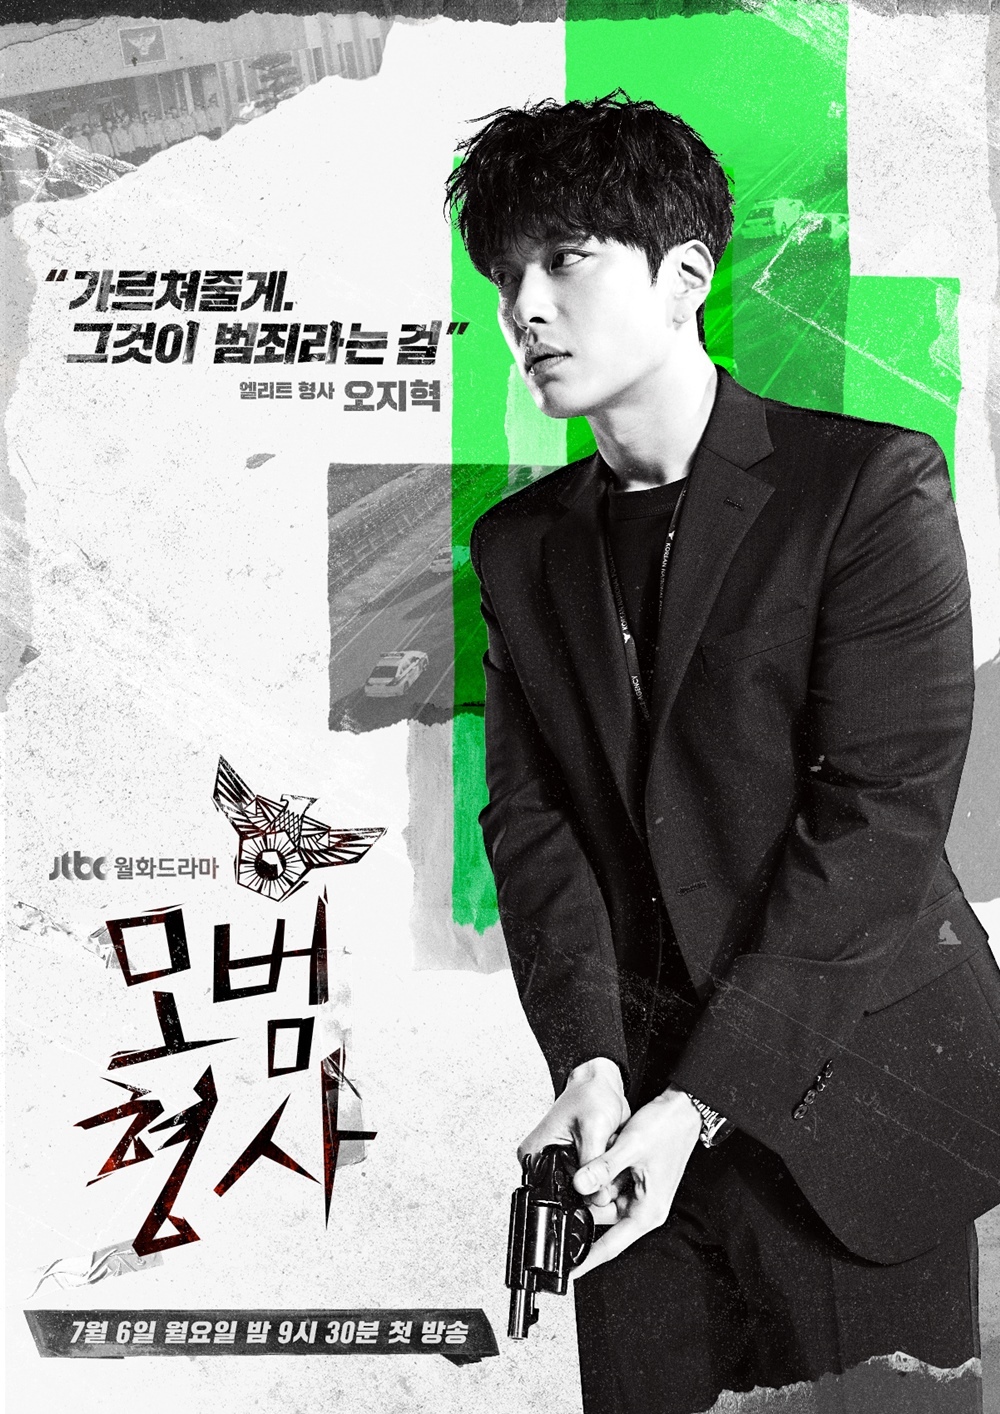 Seoul=) = The Good Detective revealed the character poster of Son Hyun-joo Jang Seung-jo Lee Elijah.JTBCs New Moonwha Drama The Good Detective (playplayplay by Choi Jin-won/director Cho Nam-guk) unveiled a character poster featuring Son Hyo-jo Jang Seung-jo Lee Elijah on the 11th.The Character Poster is a black and white monotone using collage techniques.First, the character poster of the life-style veteran Detective Kang Do-chang (Son Hyun-joo Boone) is showing off his spleen visuals with handcuffs.Kang Do Chang is a delightful and humane Detective, who is trying to maintain a Detective life with the Good Detective, such as maintaining the phenomenon as a salary earner and sometimes compromising with reality.However, the goal of returning the five years ago is to show a different appearance from the past.Oh Ji-hyeok (Jang Seung-jo) is a sophisticated black suit that reveals the aspect of luxury elite Detective.Oh Ji-hyeok has been on the elite course as the top of the Seoul Gwangsudae service rating from the police force. Recently, he has inherited a huge legacy from his uncle and has a luxurious life that does not have to give up to money and power.Meanwhile, The Good Detective is an exciting rhetoric that tracks a single truth that is covered up by two different Detectives.I finished shooting in May and plan to go to A house theater with well-made drama by concentrating on the second half work.It will be broadcasted for the first time on July 6 at 9:30 pm.